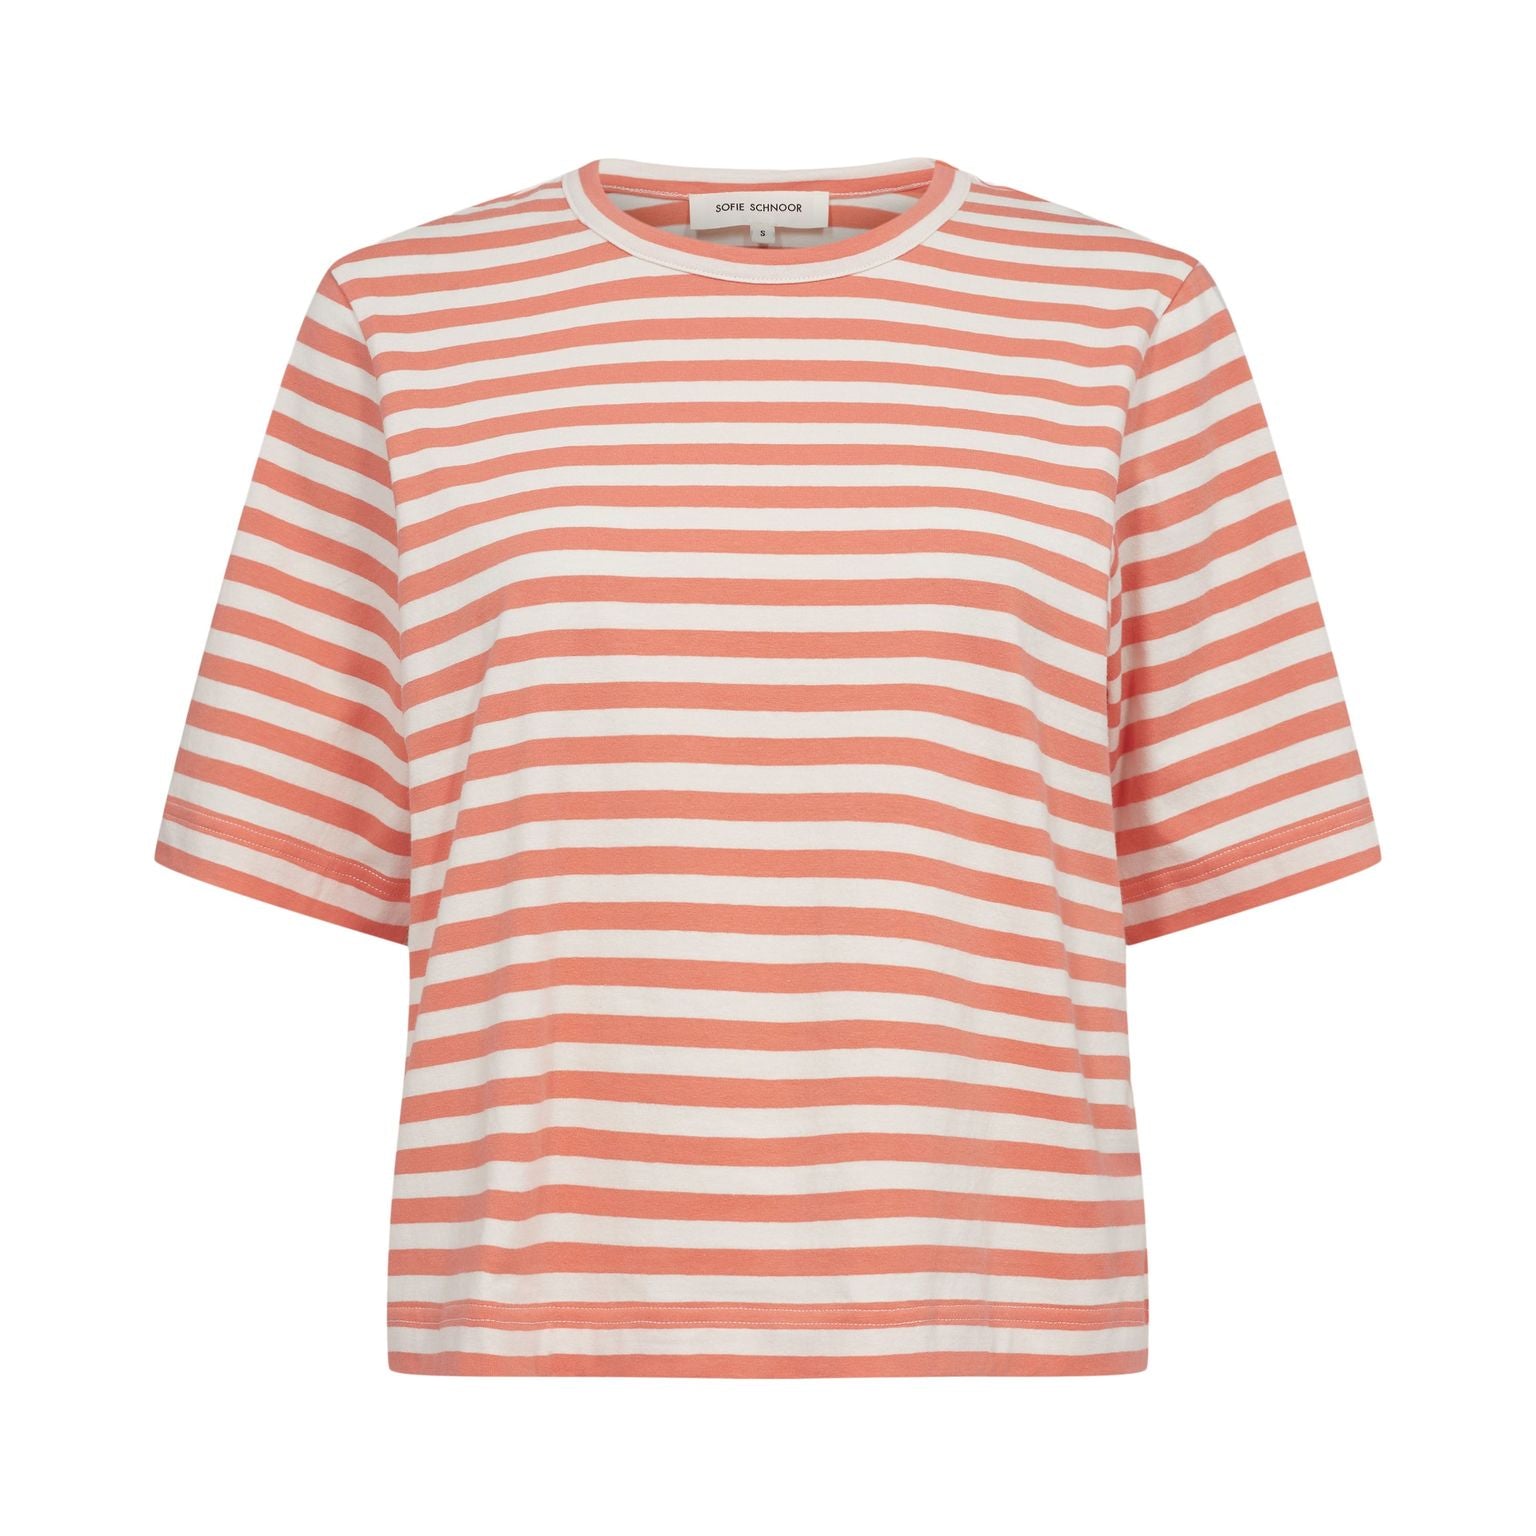 Sofie Schnoor T-Shirt Coral Striped